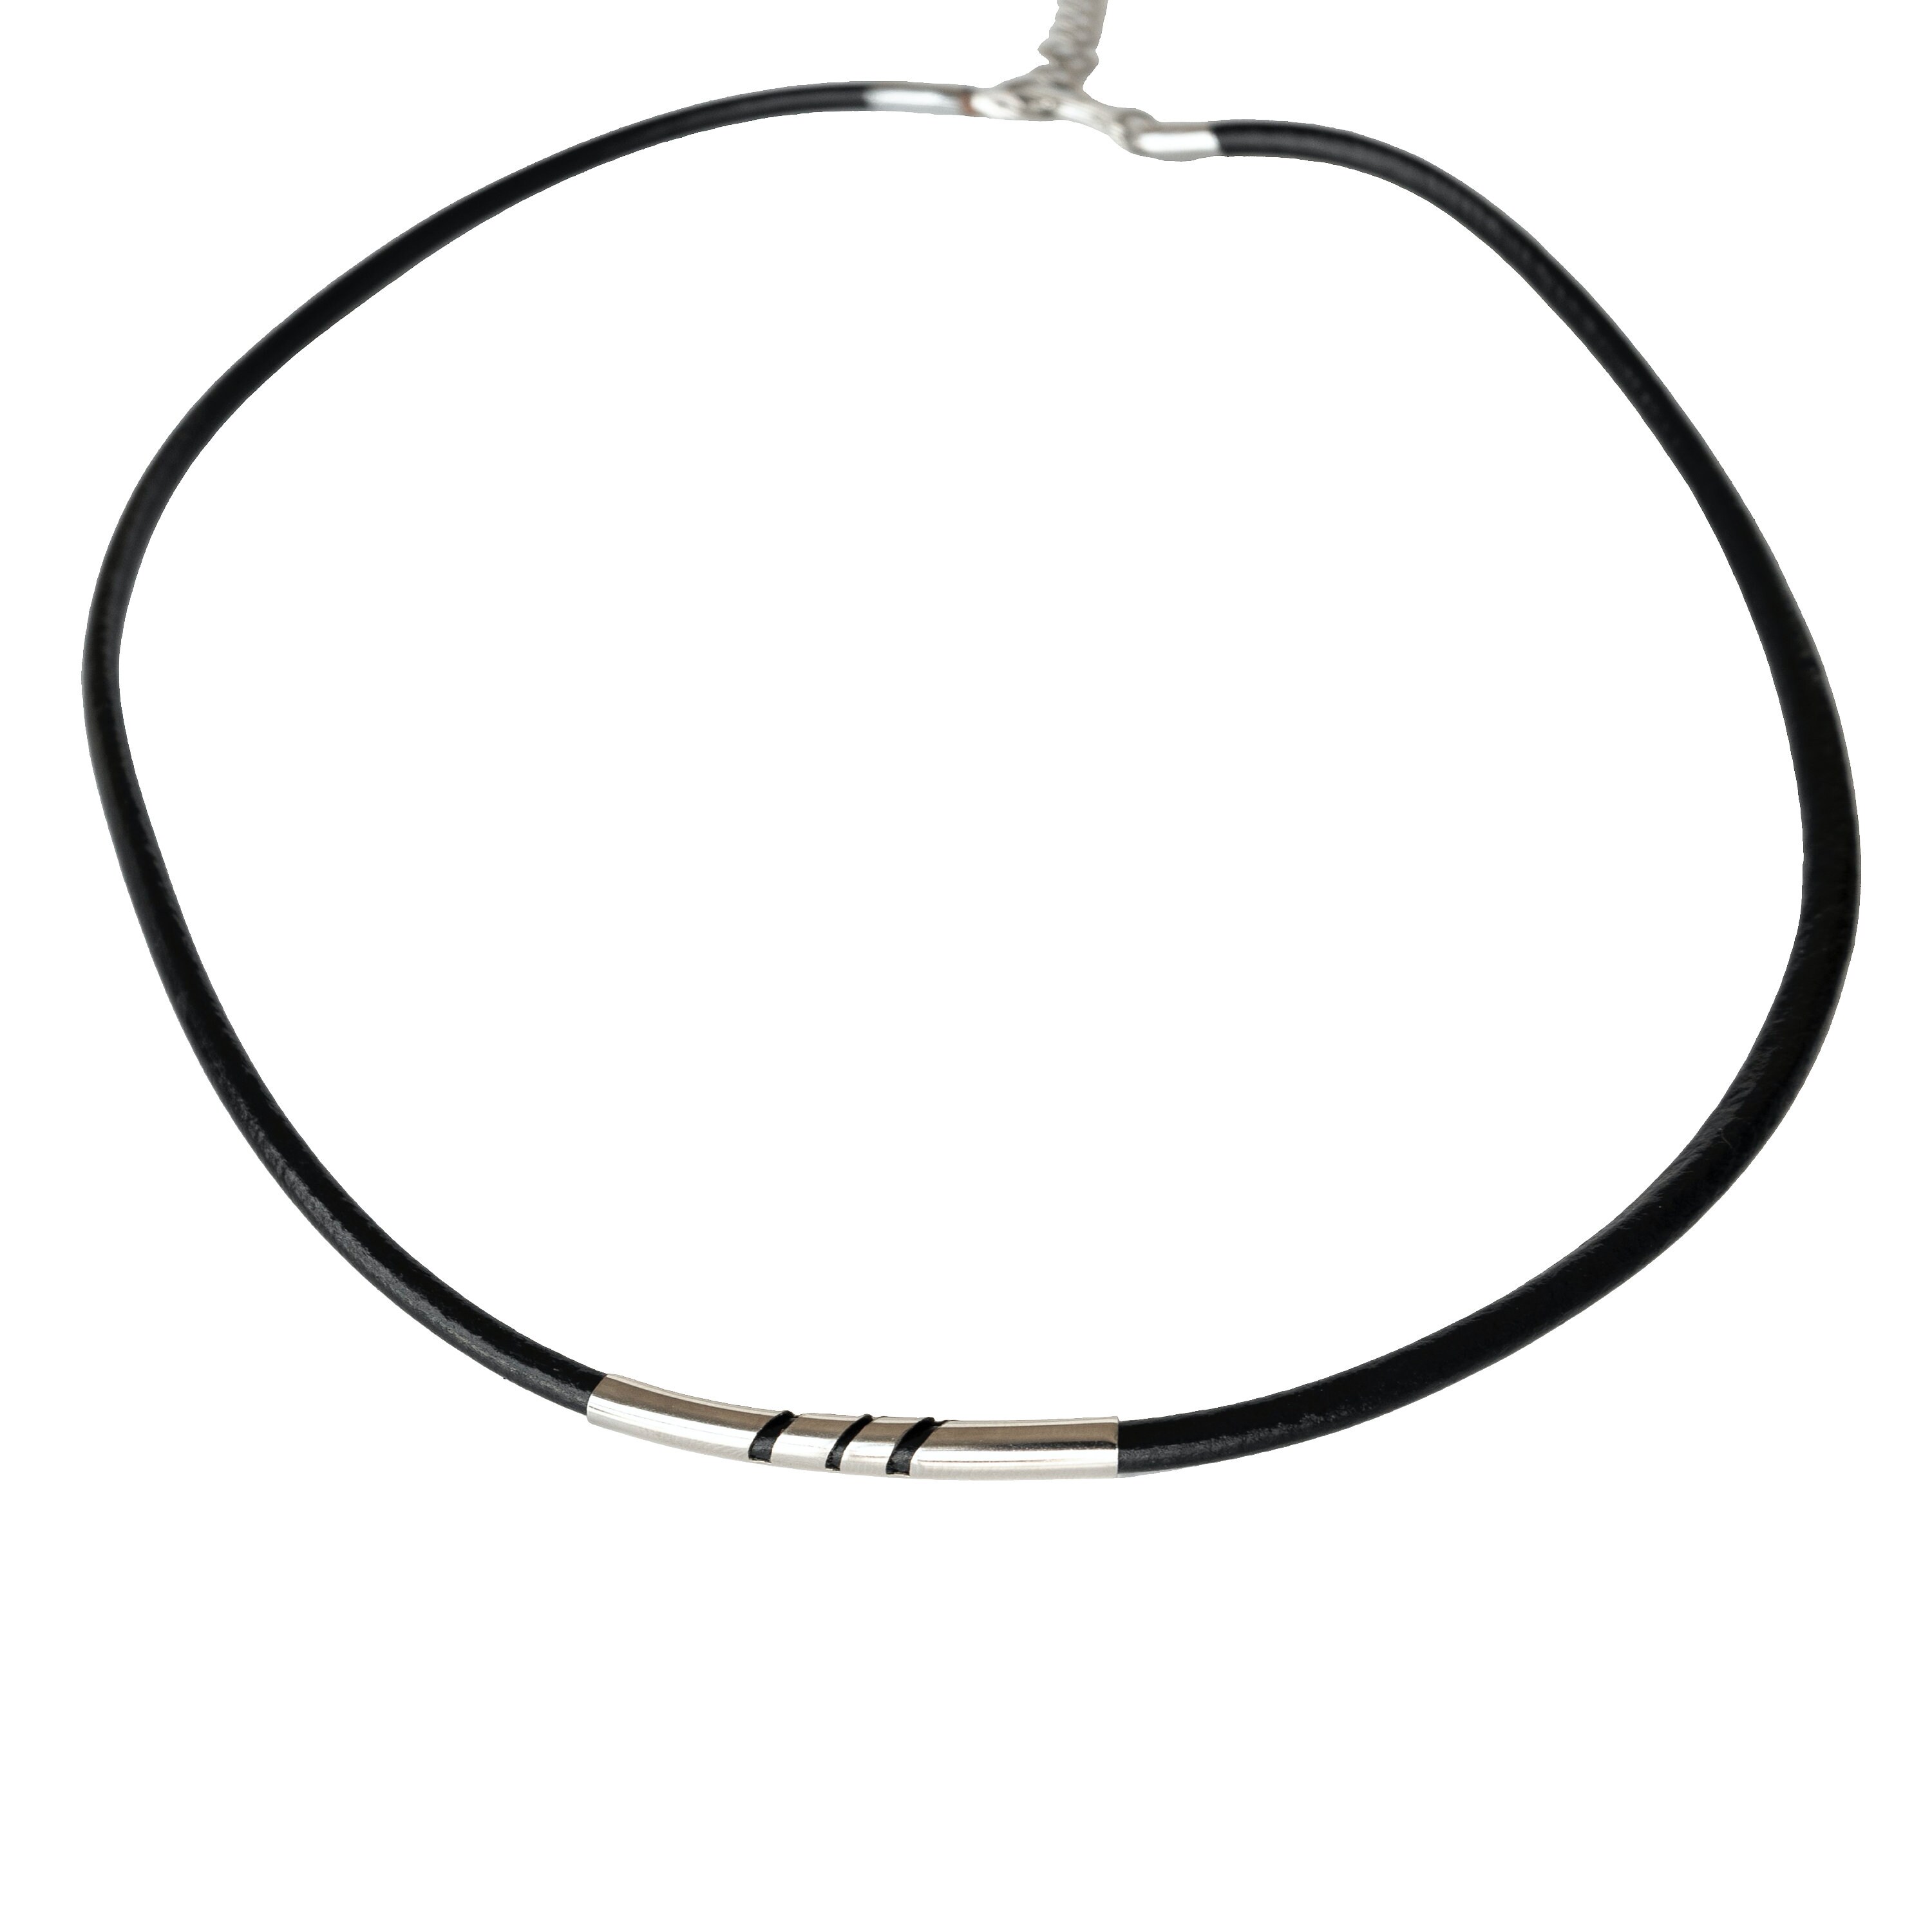 Choker Collar Leather Choker Male Necklace – strappz